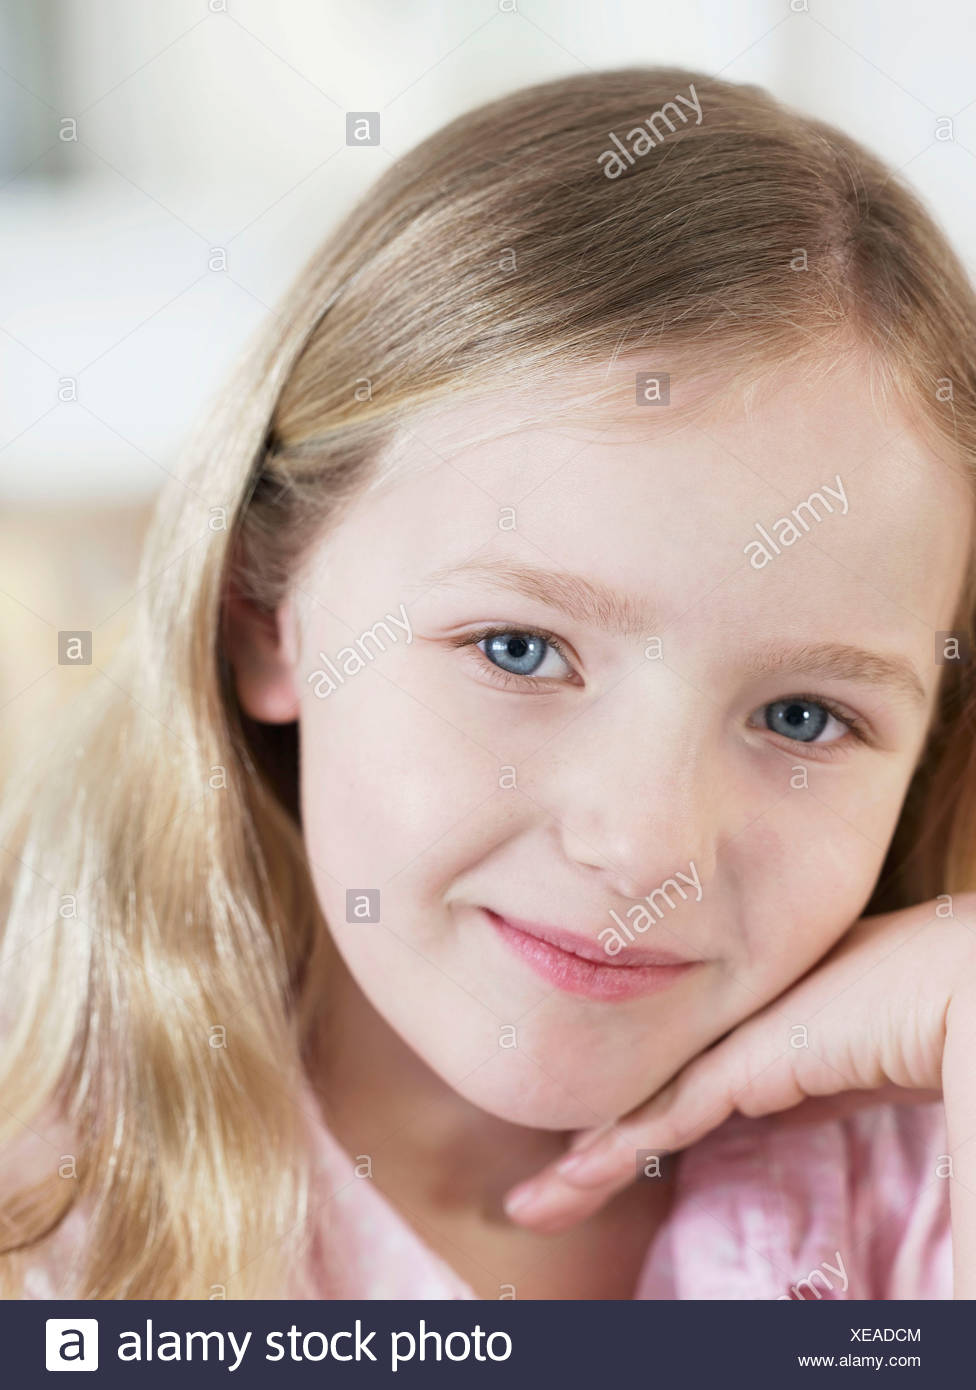 Portrait Of Young Blue Eyed Blonde Girl Stock Photo 284201140 Alamy